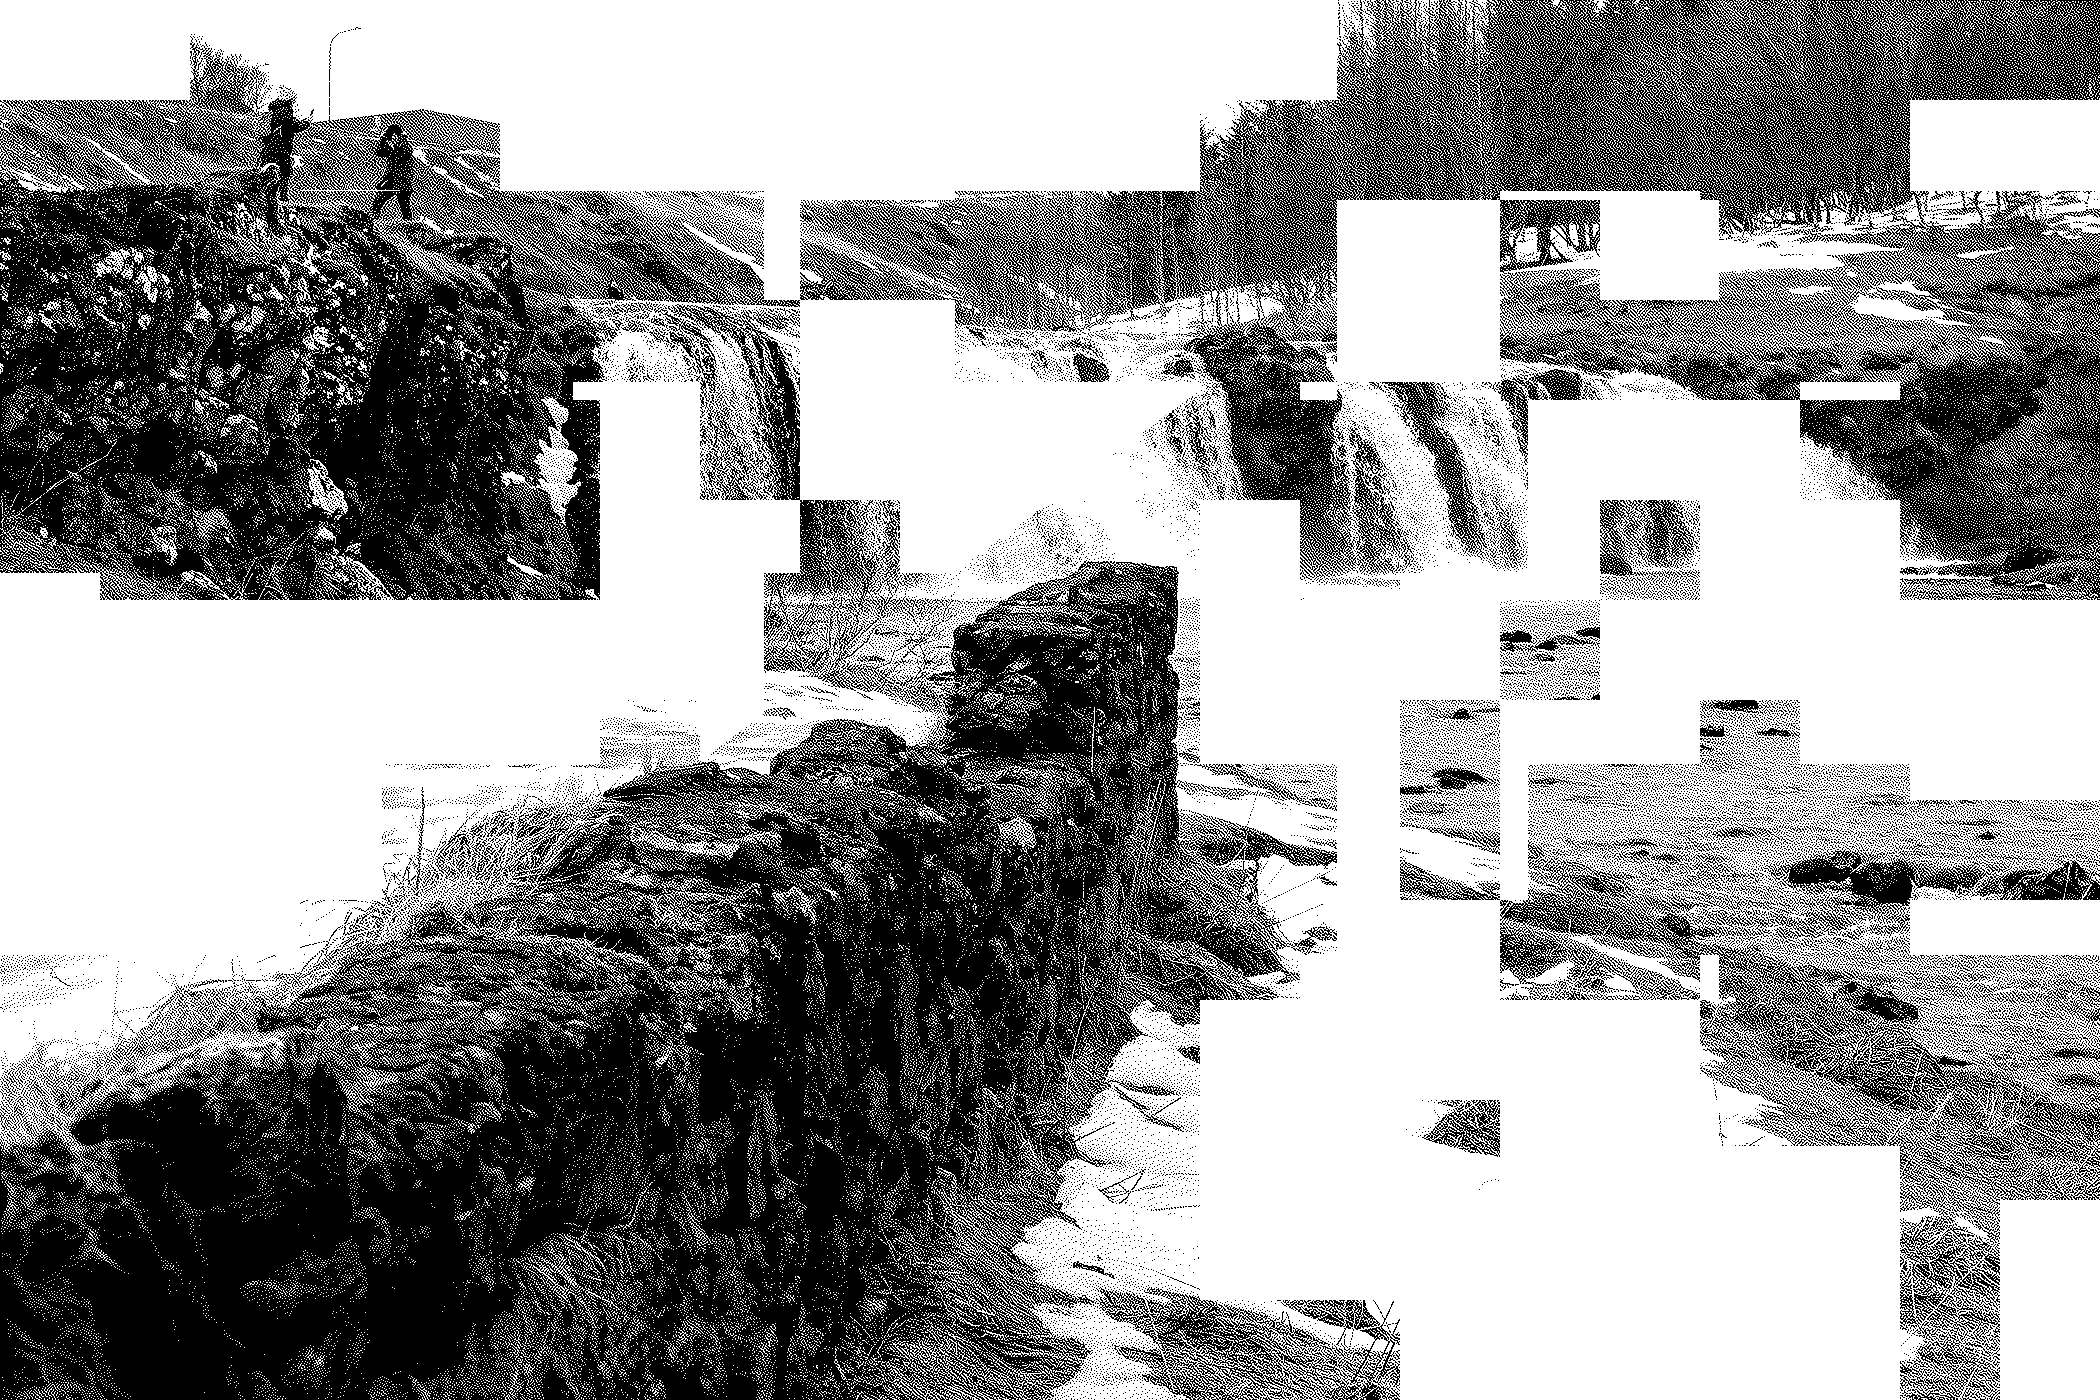 A view of the waterfall in Varmá. The picture is dithered and blocky. Reminiscent of how the original mac computers rendered pictures.